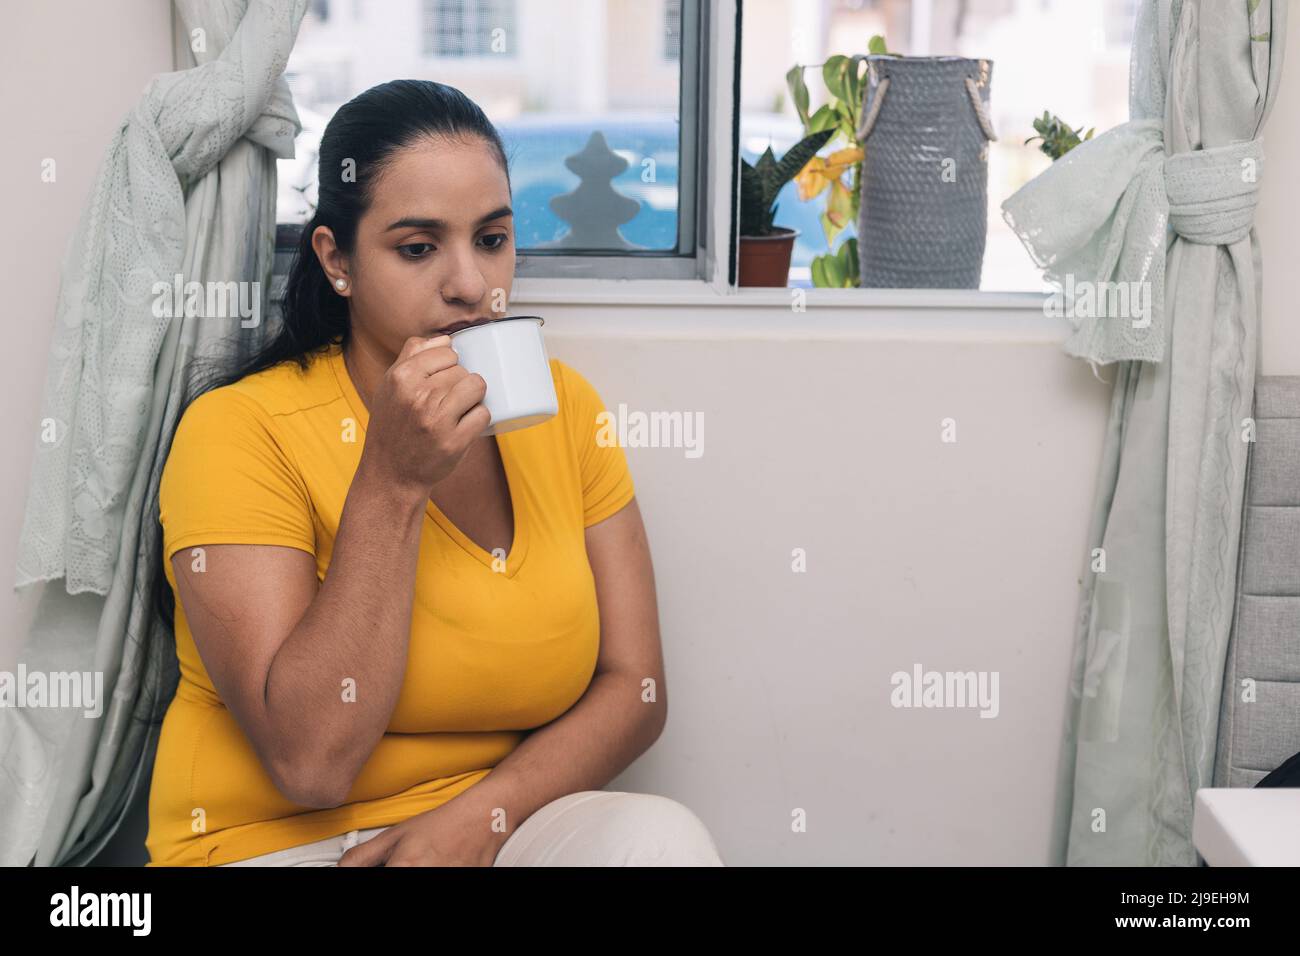 woman with yellow sweater, drinking coffee in white cup Stock Photo